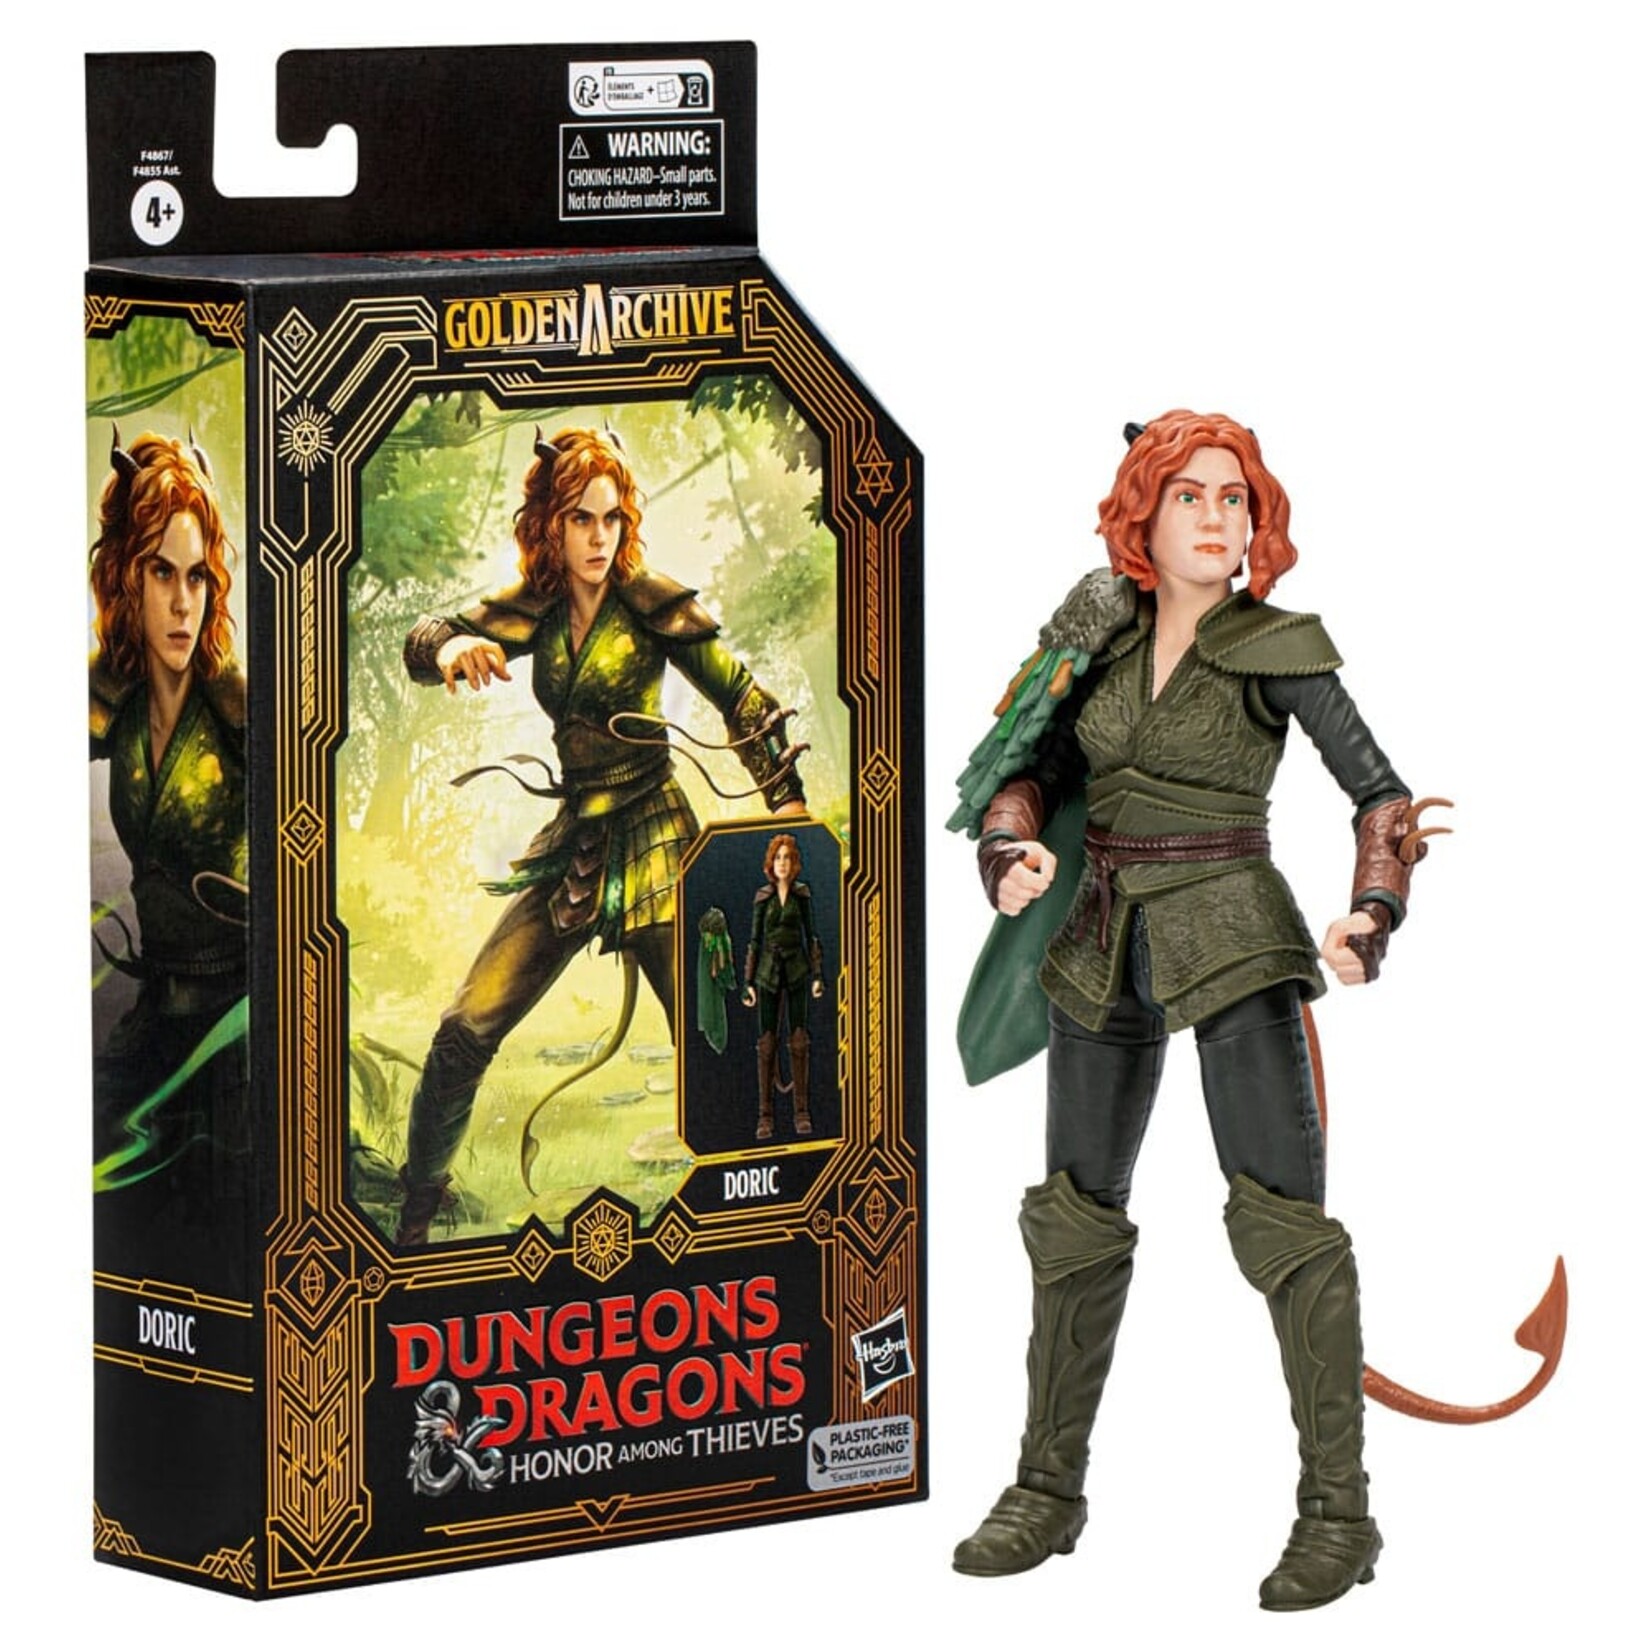 Hasbro Hasbro Dungeons & Dragons Honor Among Thieves Golden Archive Action Figure Doric 15 cm